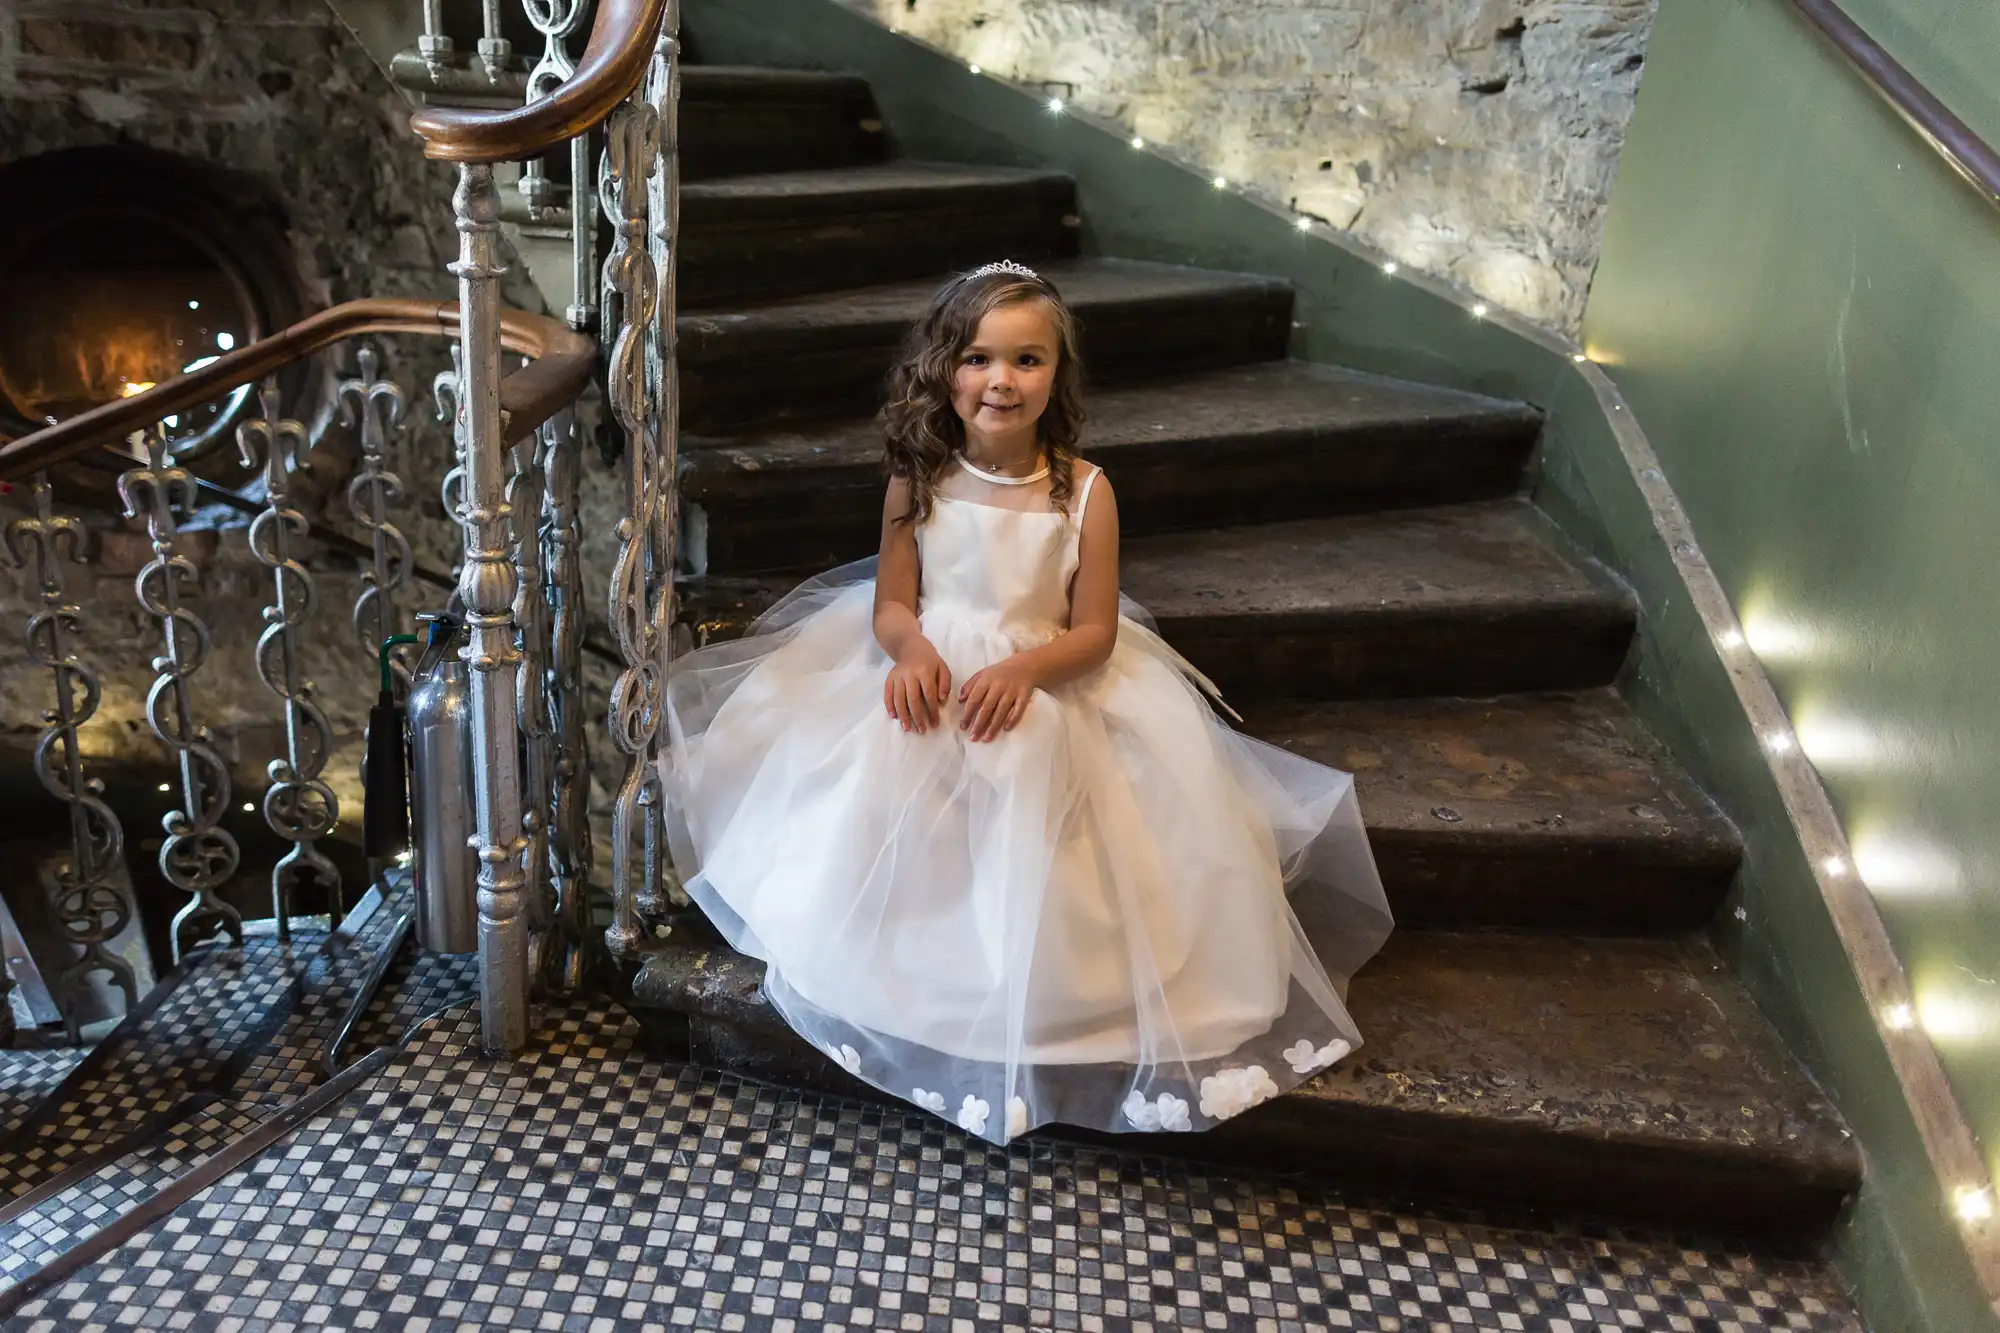 A young girl in a white dress sits smiling on a stone staircase with ornate metal railings, in a dimly lit setting.